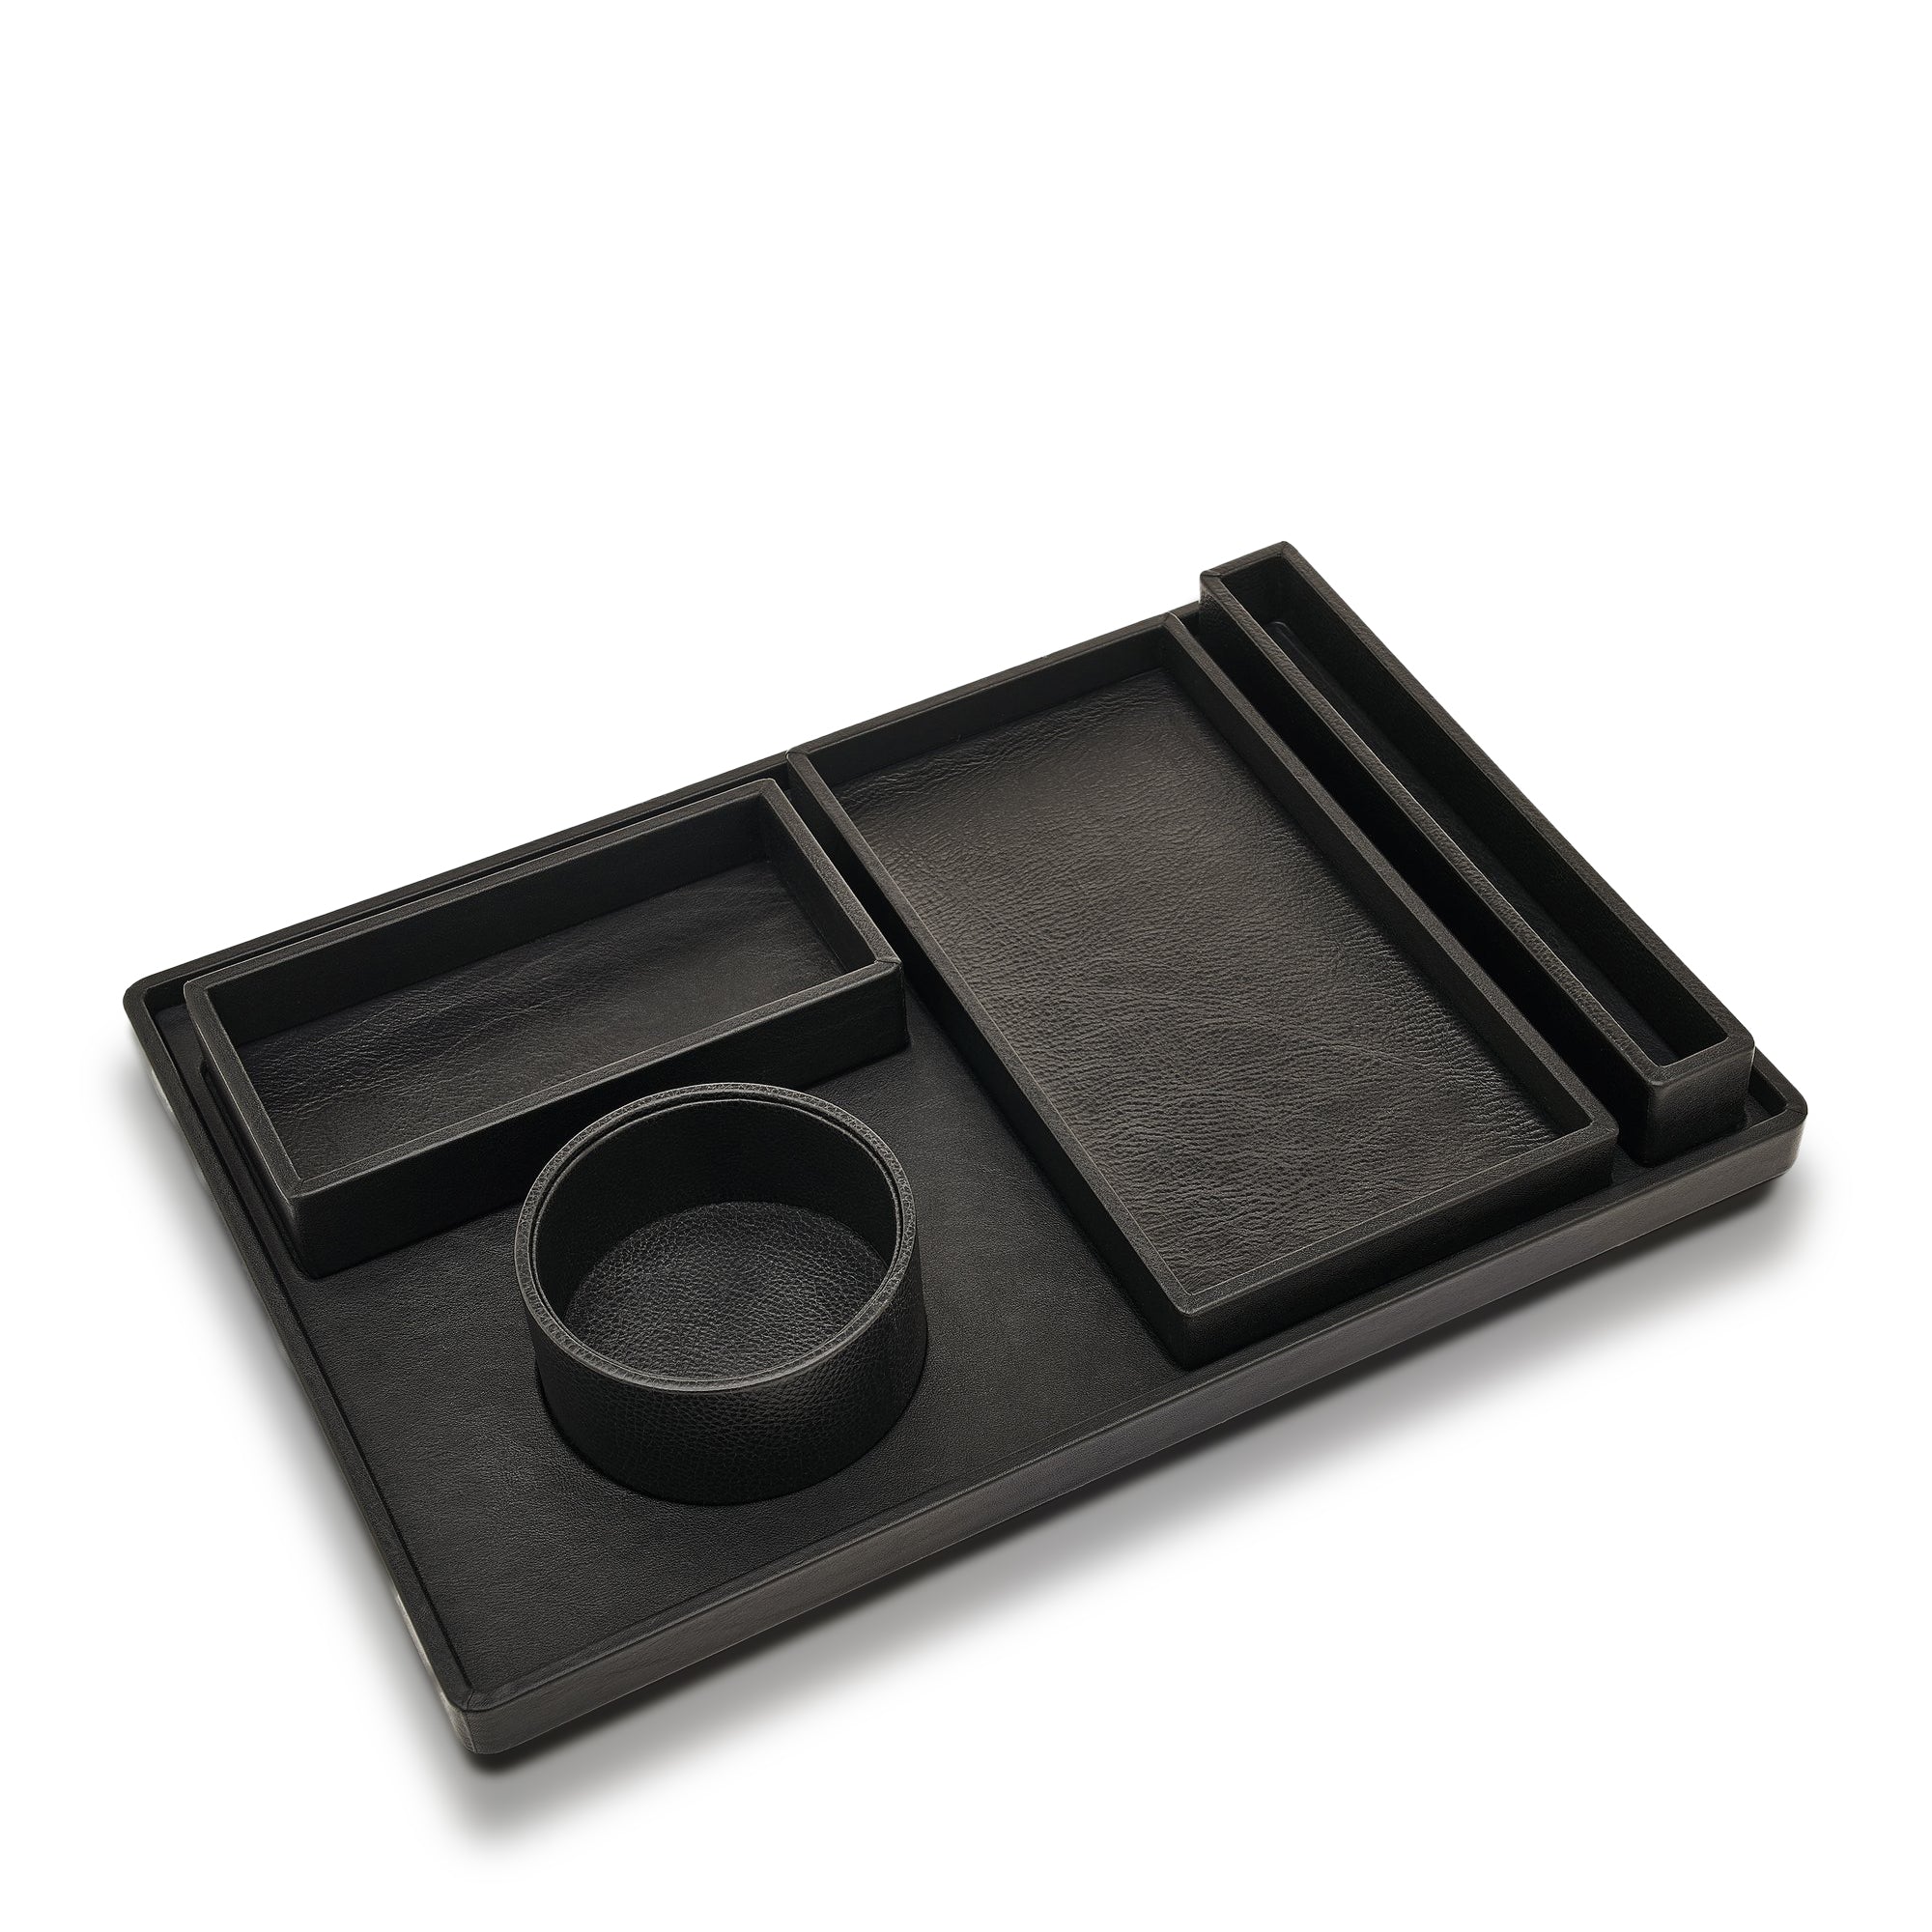 Canteen  tray 02 | Home accessory in leather color black